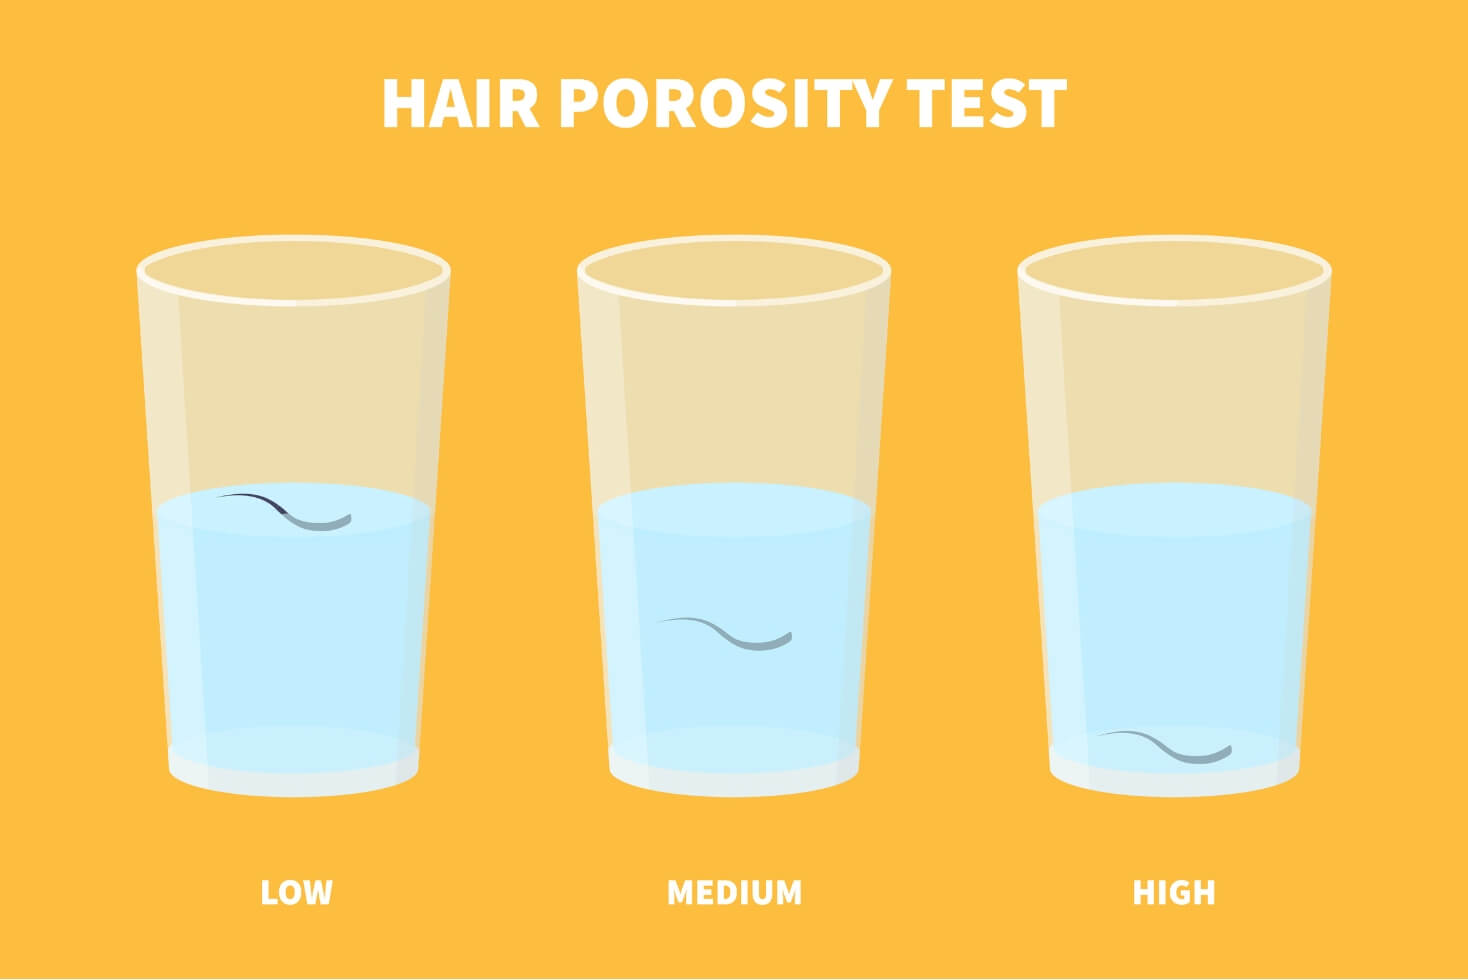 Hair Porosity Test 101 – The Complete Step-By-Step Guide